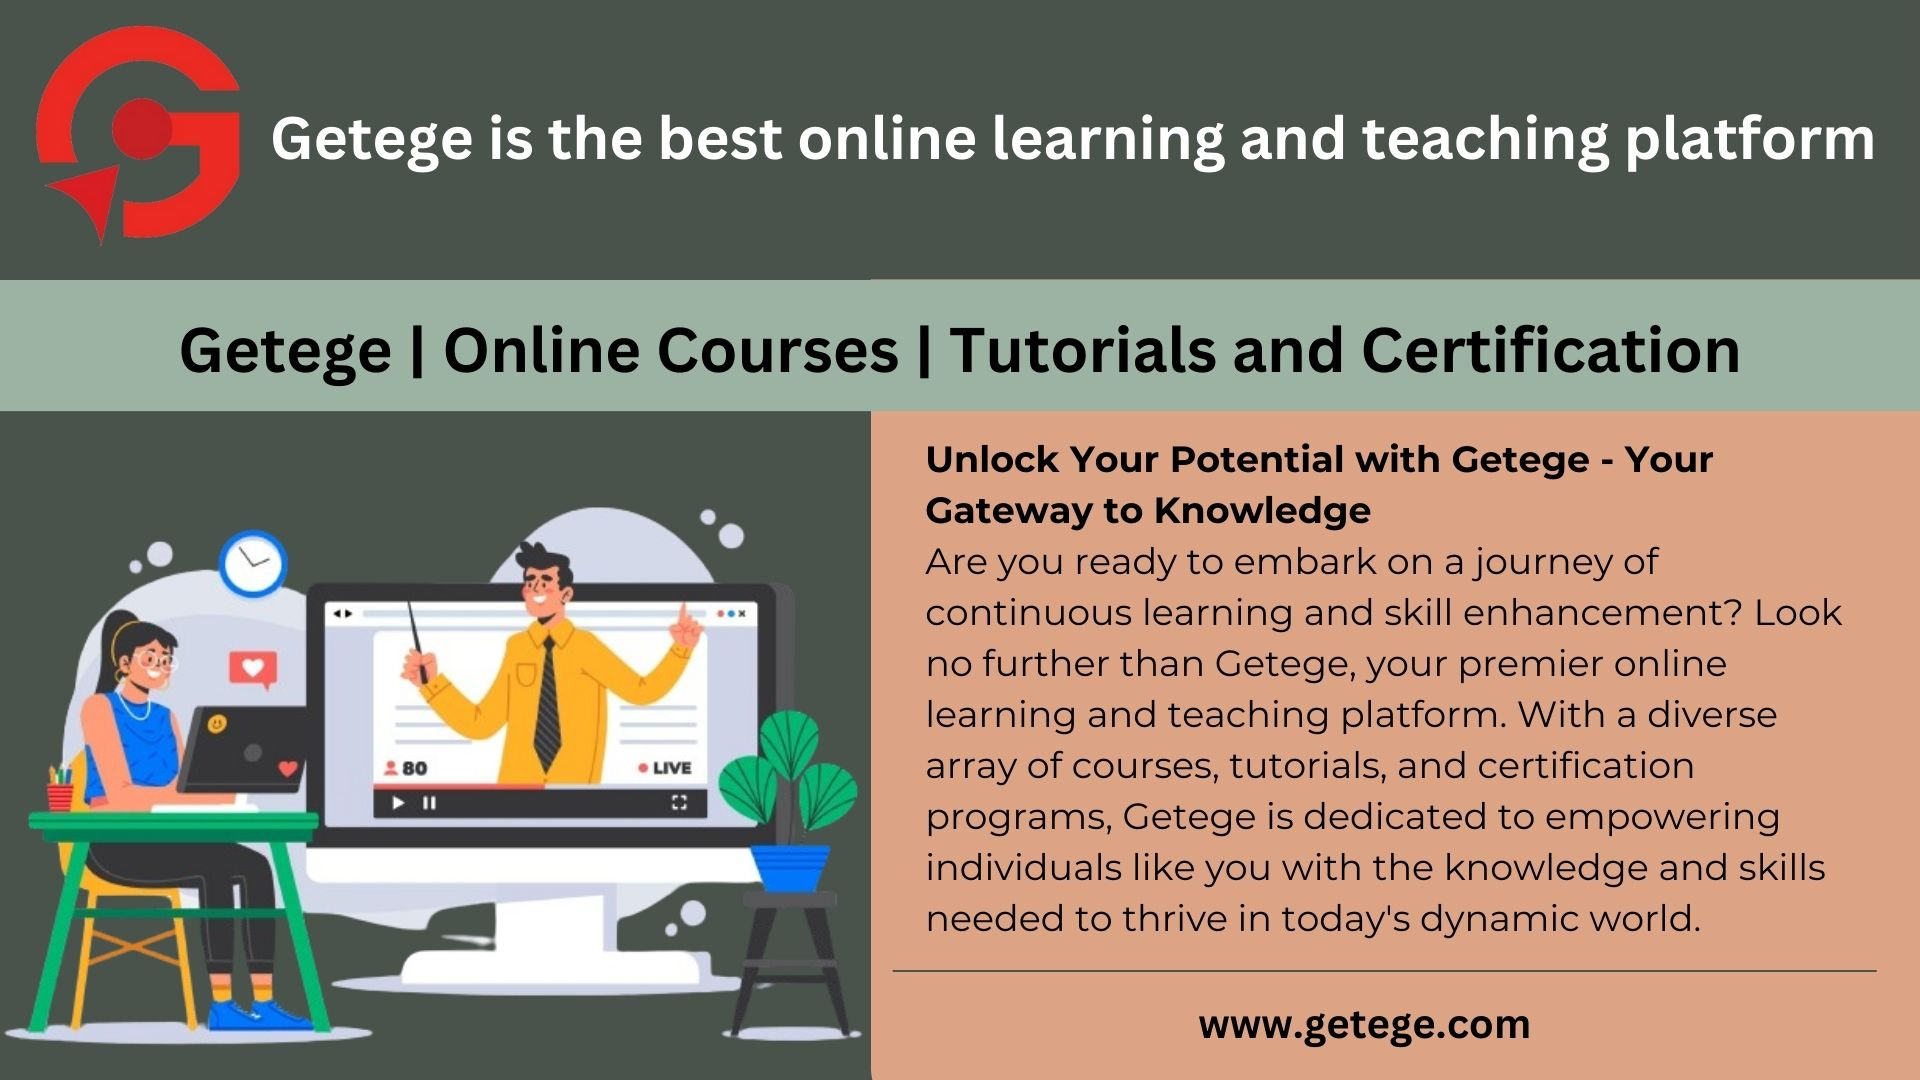 Getege is the best online learning and teaching platform